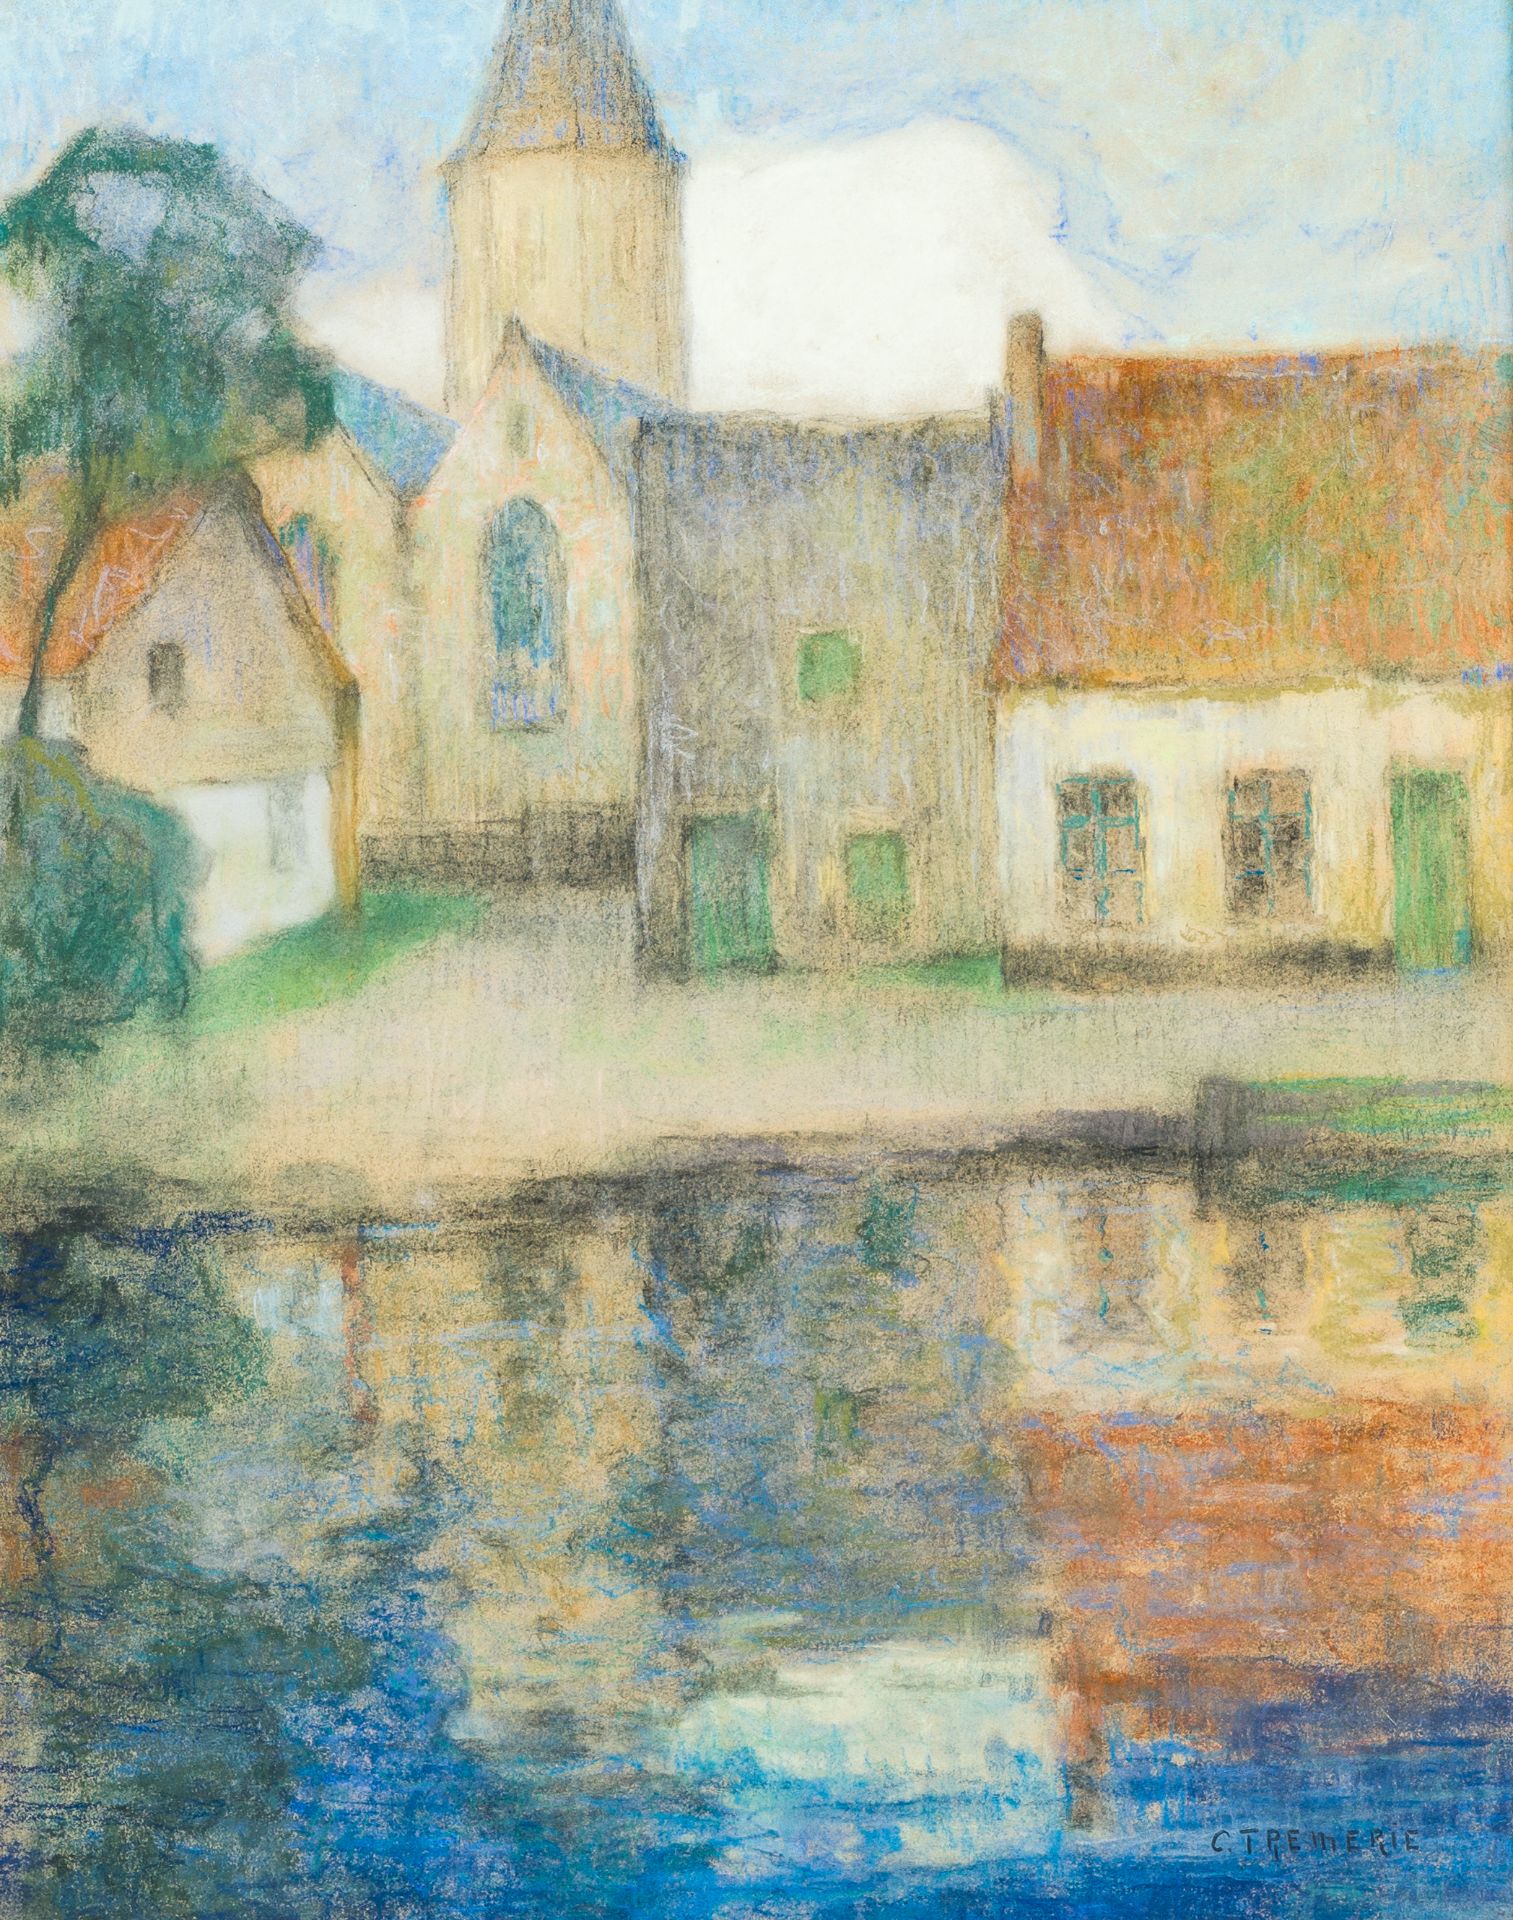 Carolus Tremerie (1858-1945): Village on the banks of the water, pastel on paper